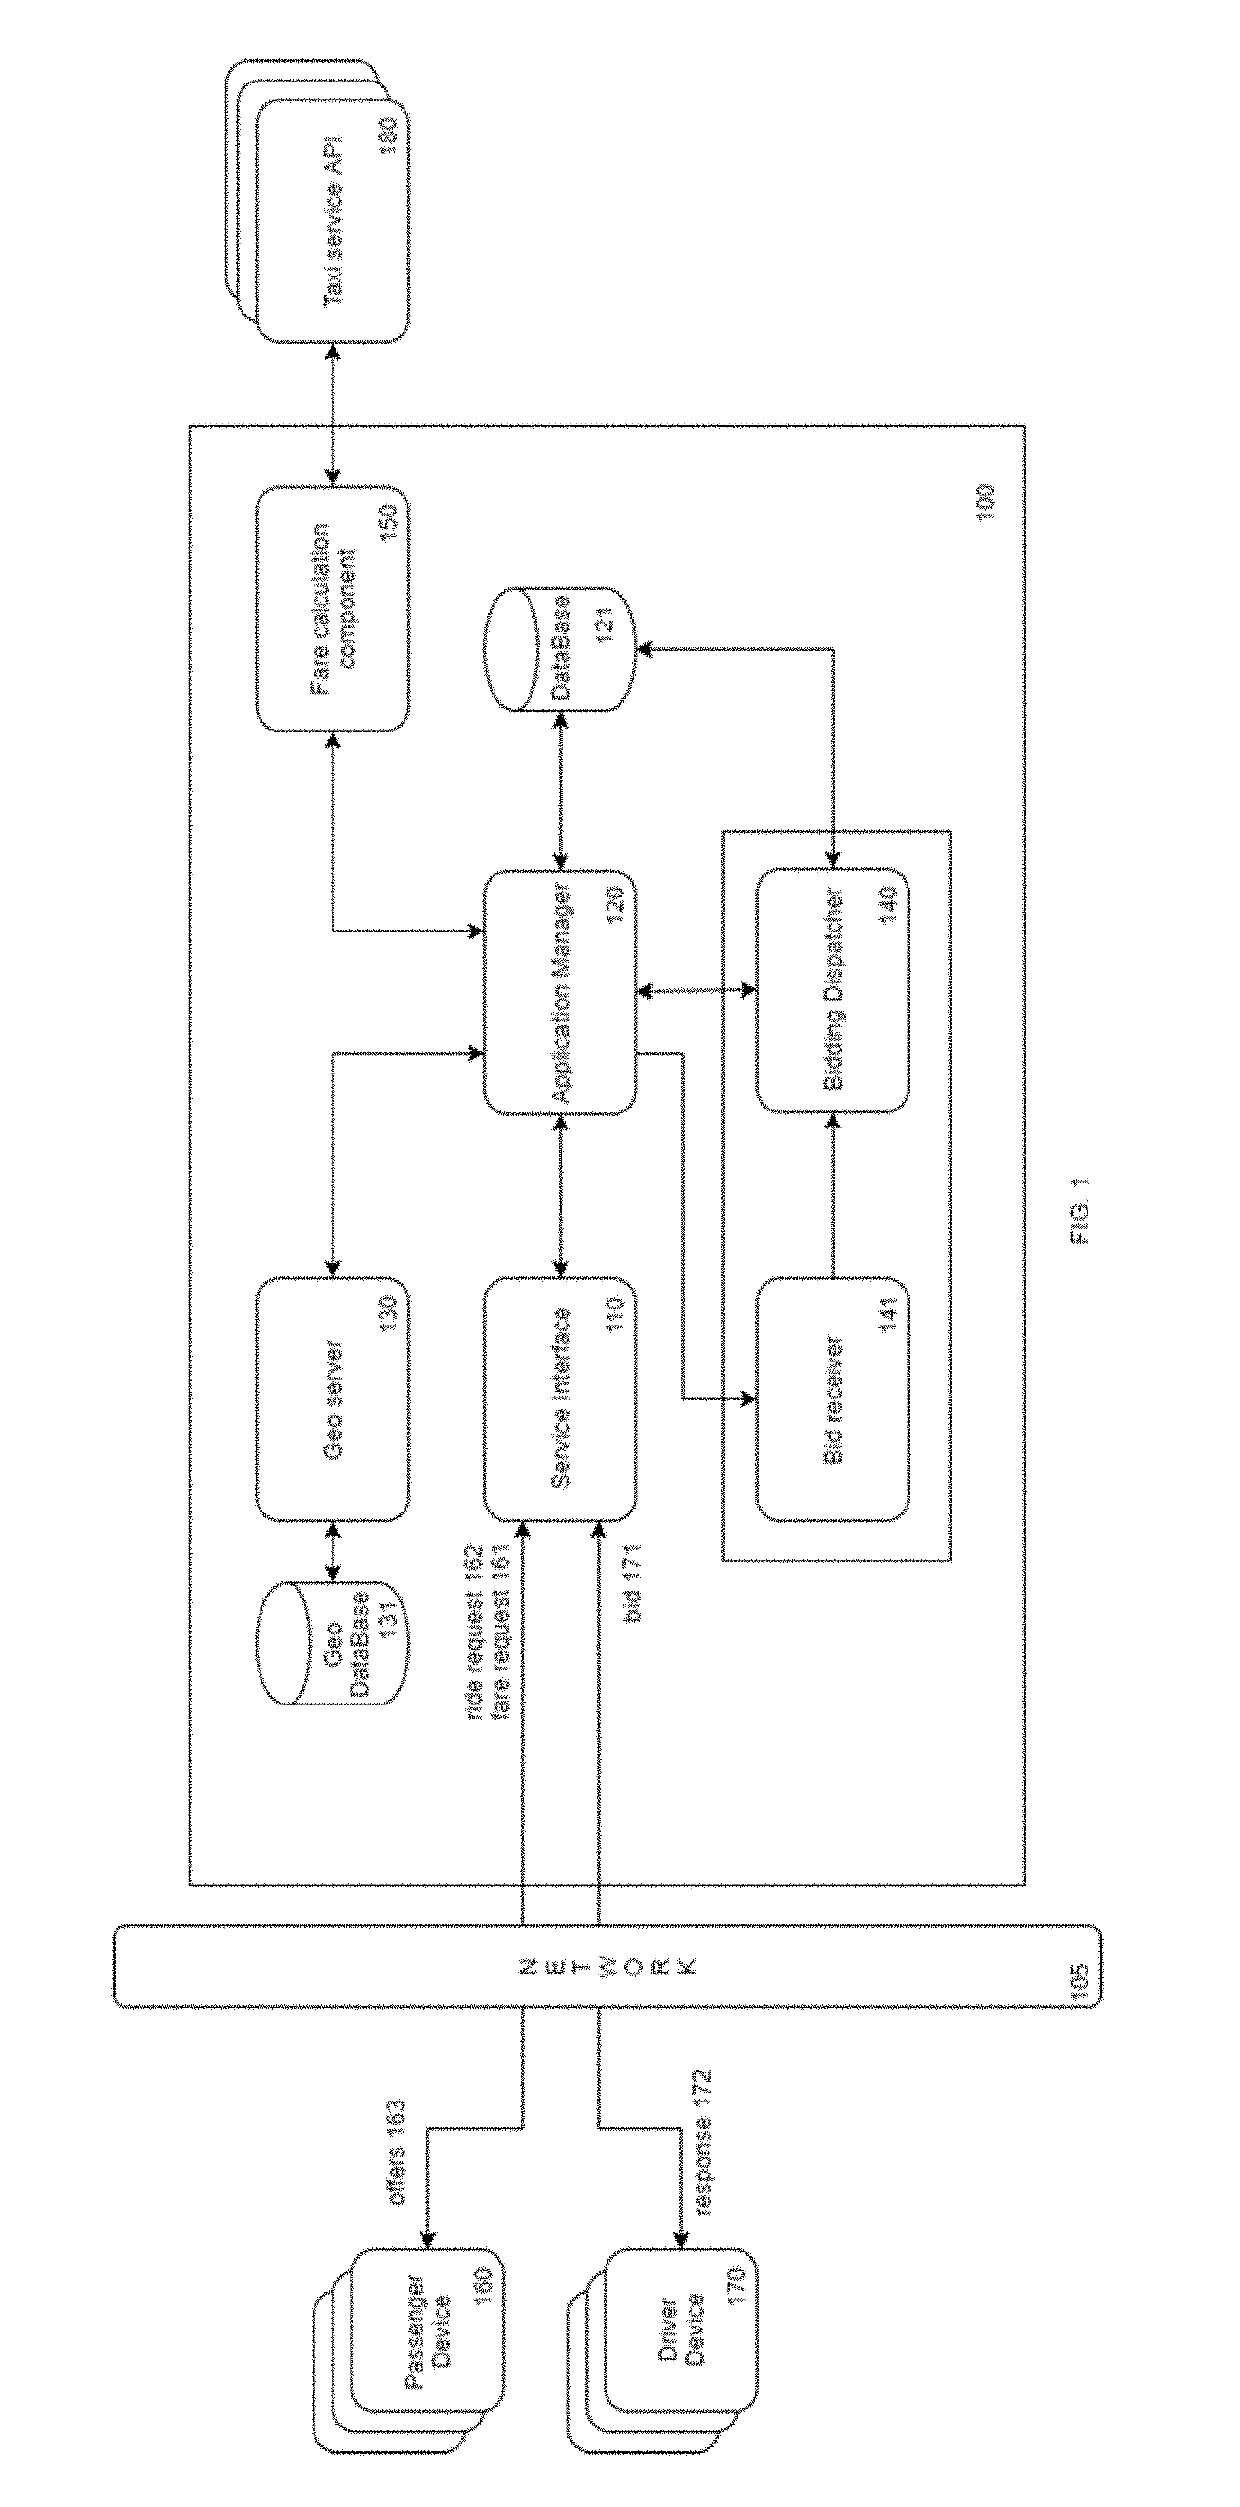 Method for requesting a ride service in a ride service system